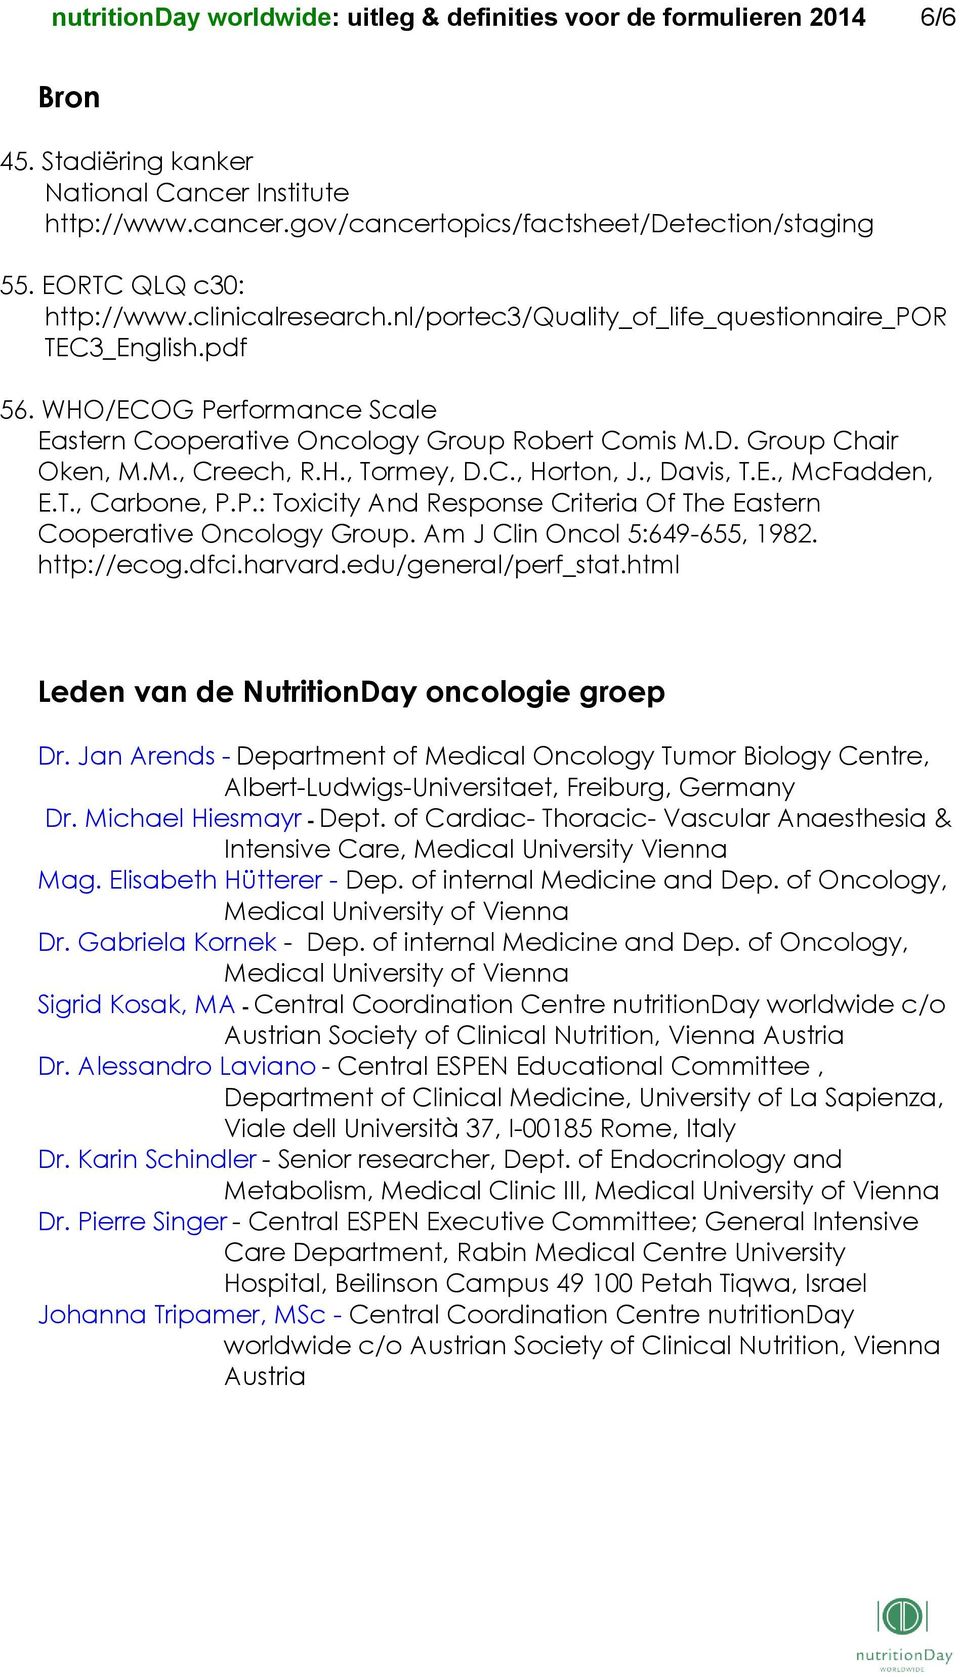 Group Chair Oken, M.M., Creech, R.H., Tormey, D.C., Horton, J., Davis, T.E., McFadden, E.T., Carbone, P.P.: Toxicity And Response Criteria Of The Eastern Cooperative Oncology Group.